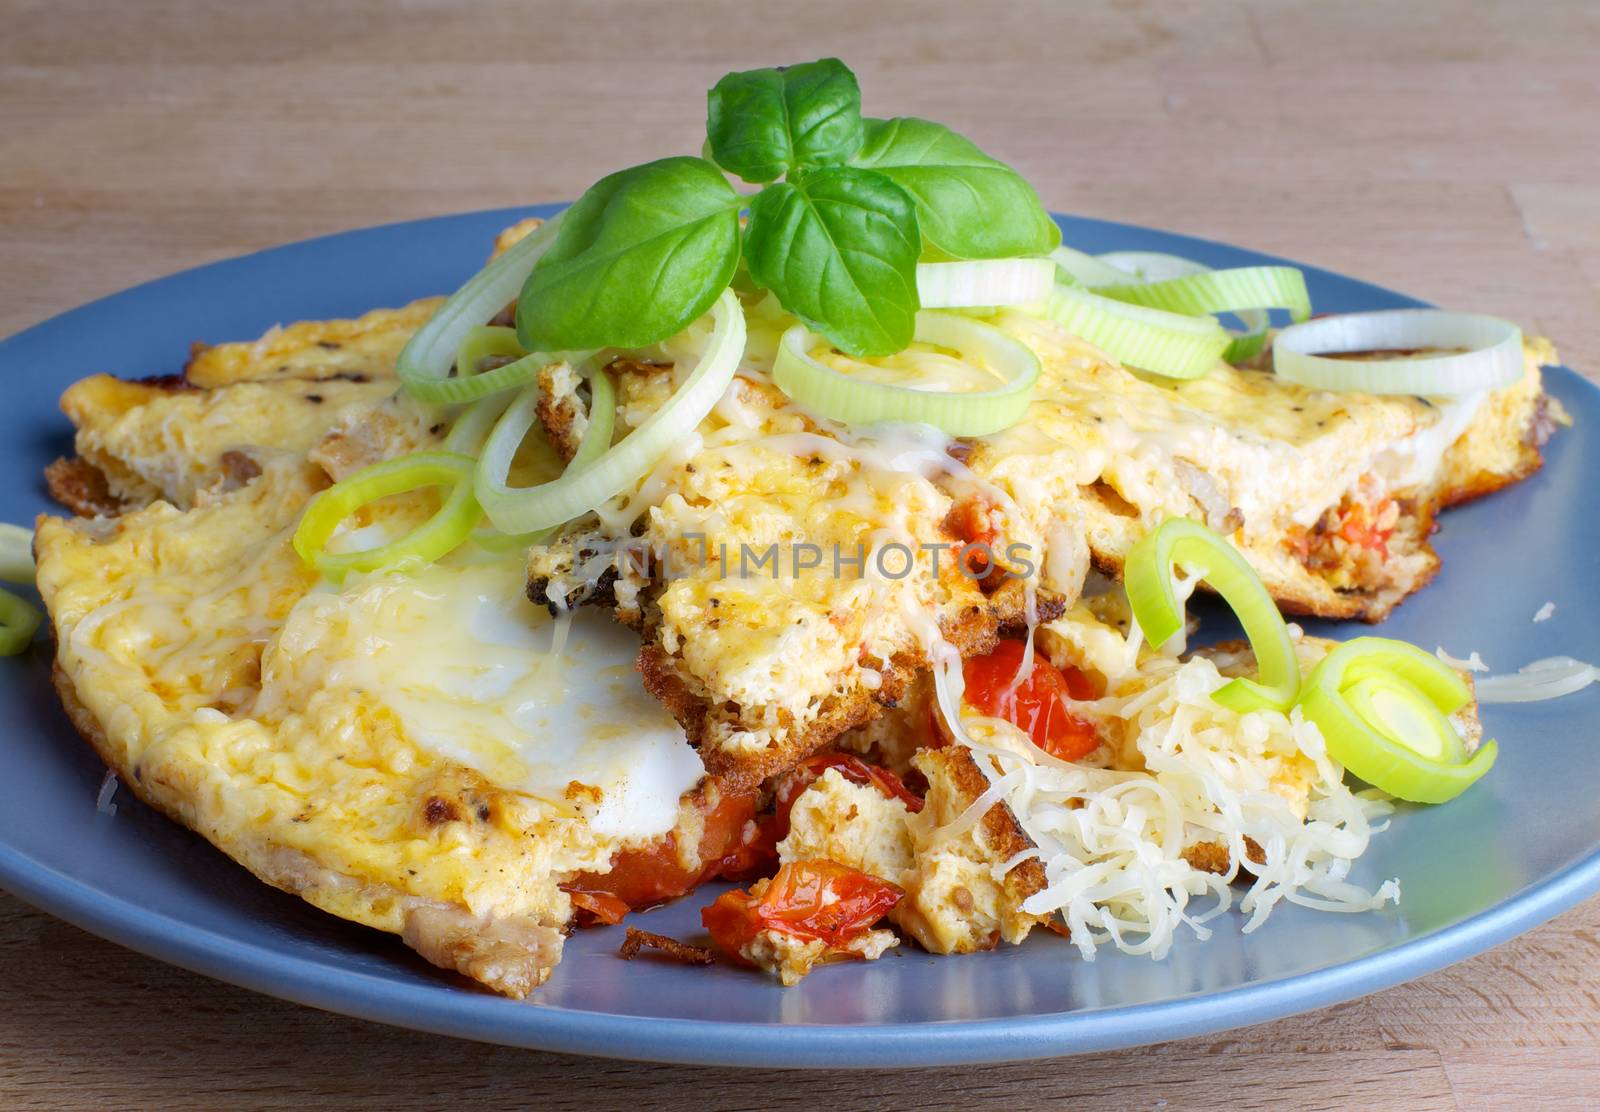 Tasty Omelette with Tomatoes, Leek and Grated Cheese on Grey Plate closeup on Wooden background